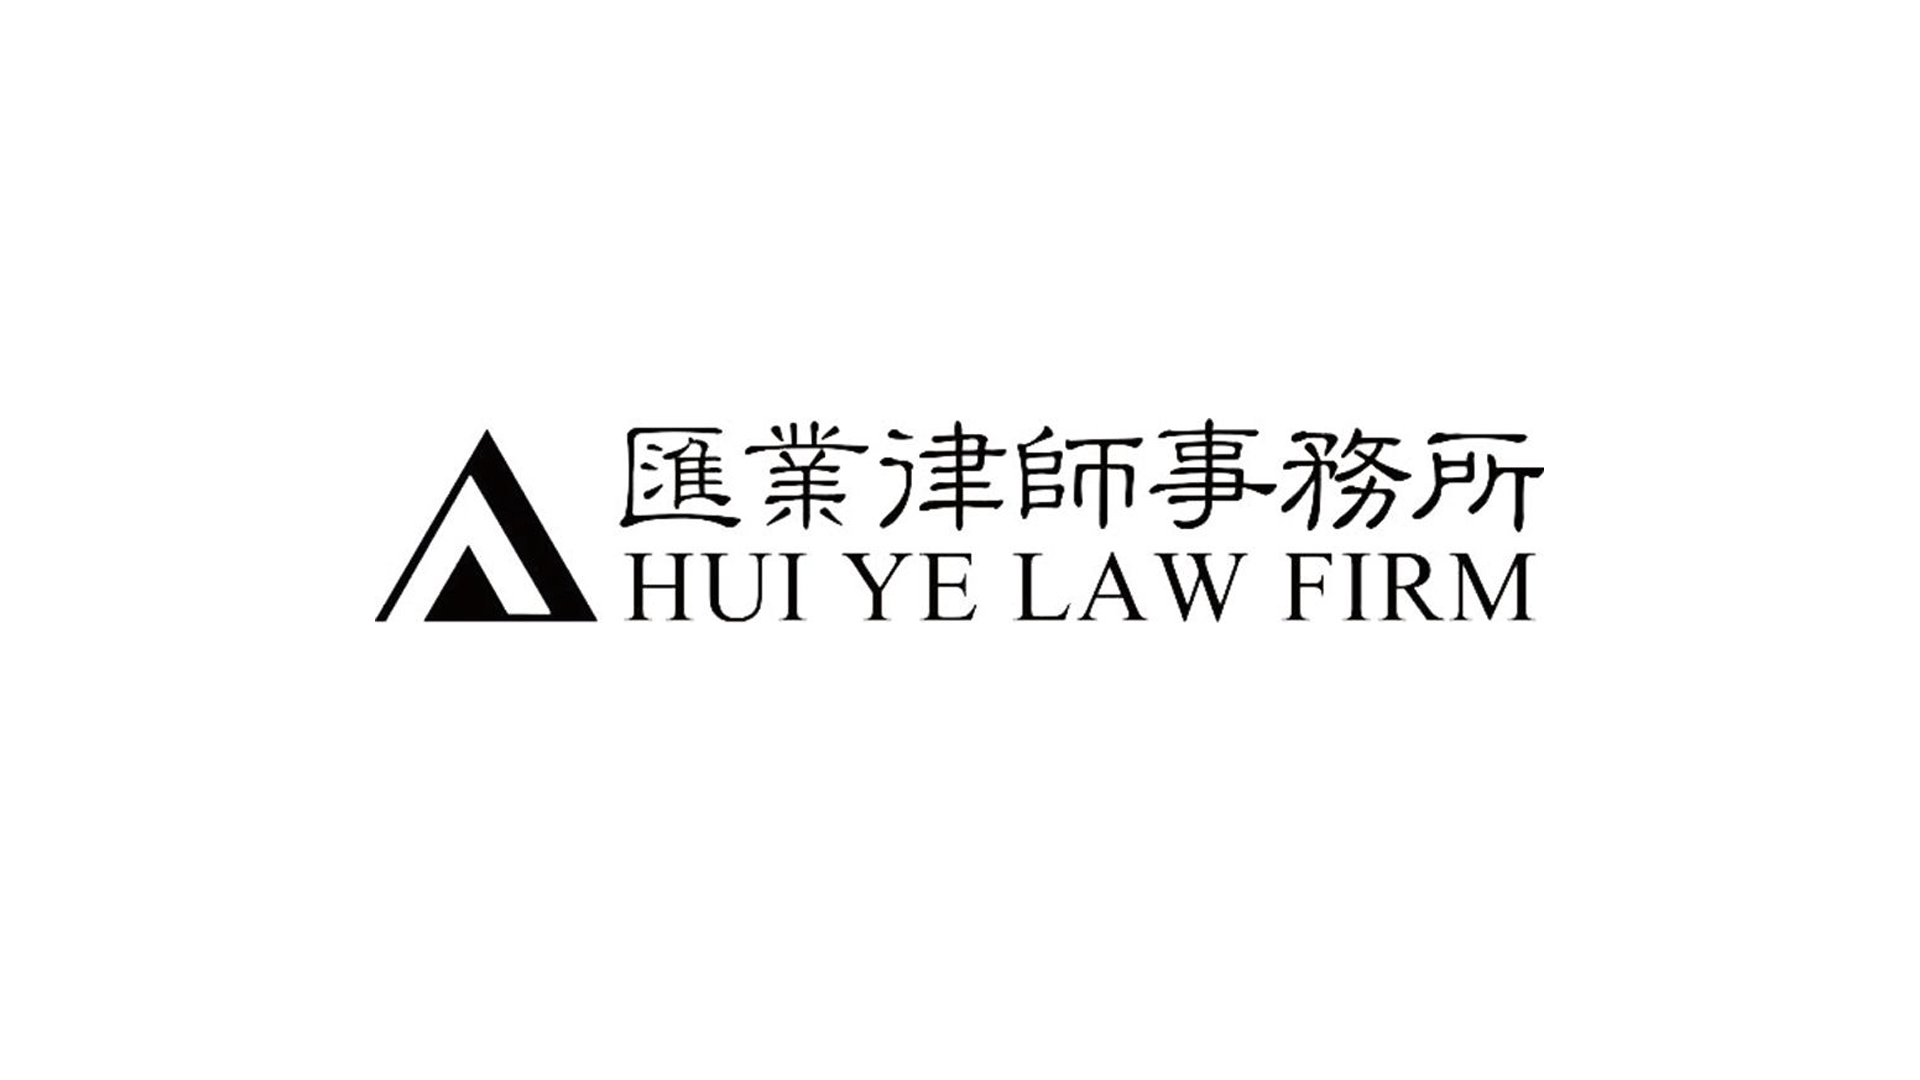 Hui Ye Law Firm Shanghai China Law Firm Profile